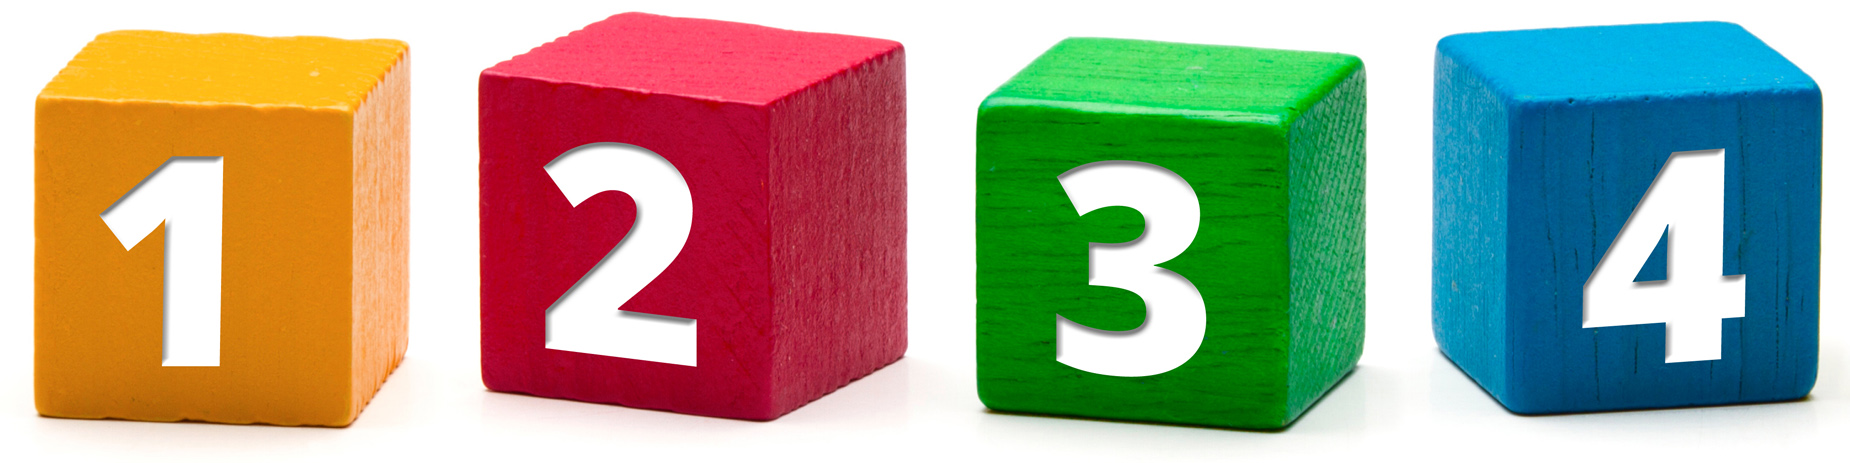 Colorful blocks showing numbers 1 through 4